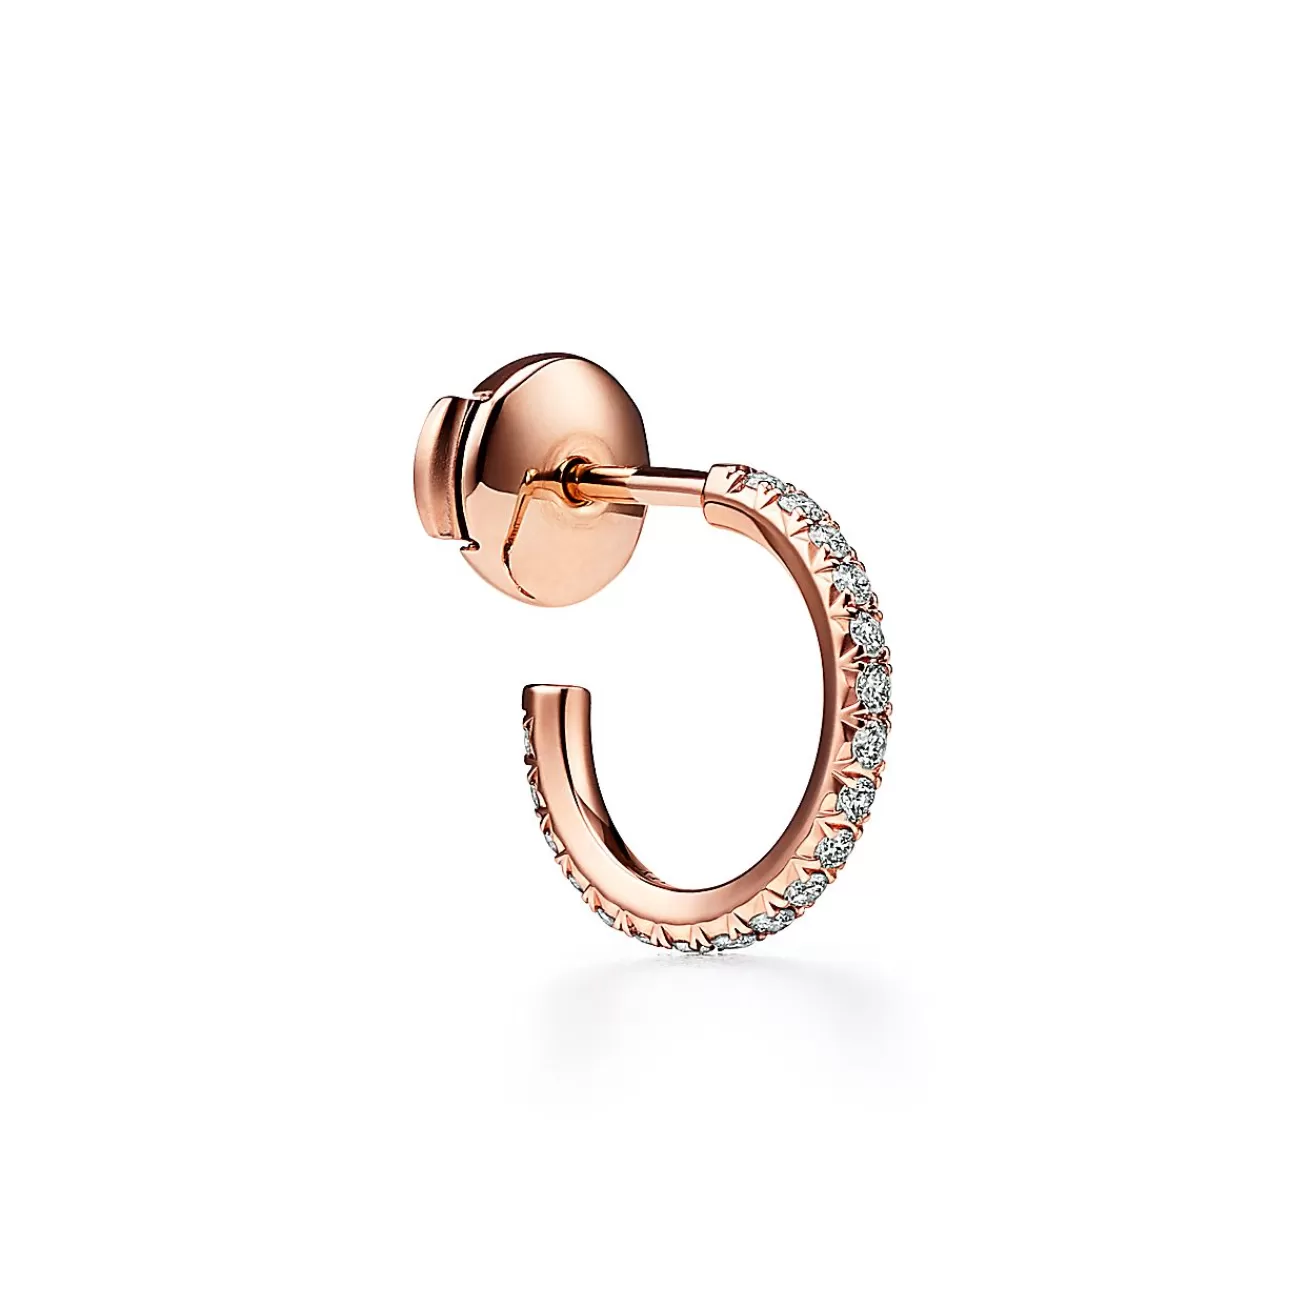 Tiffany & Co. Tiffany Metro Hoop Earrings in Rose Gold with Diamonds, Small | ^ Earrings | Gifts for Her